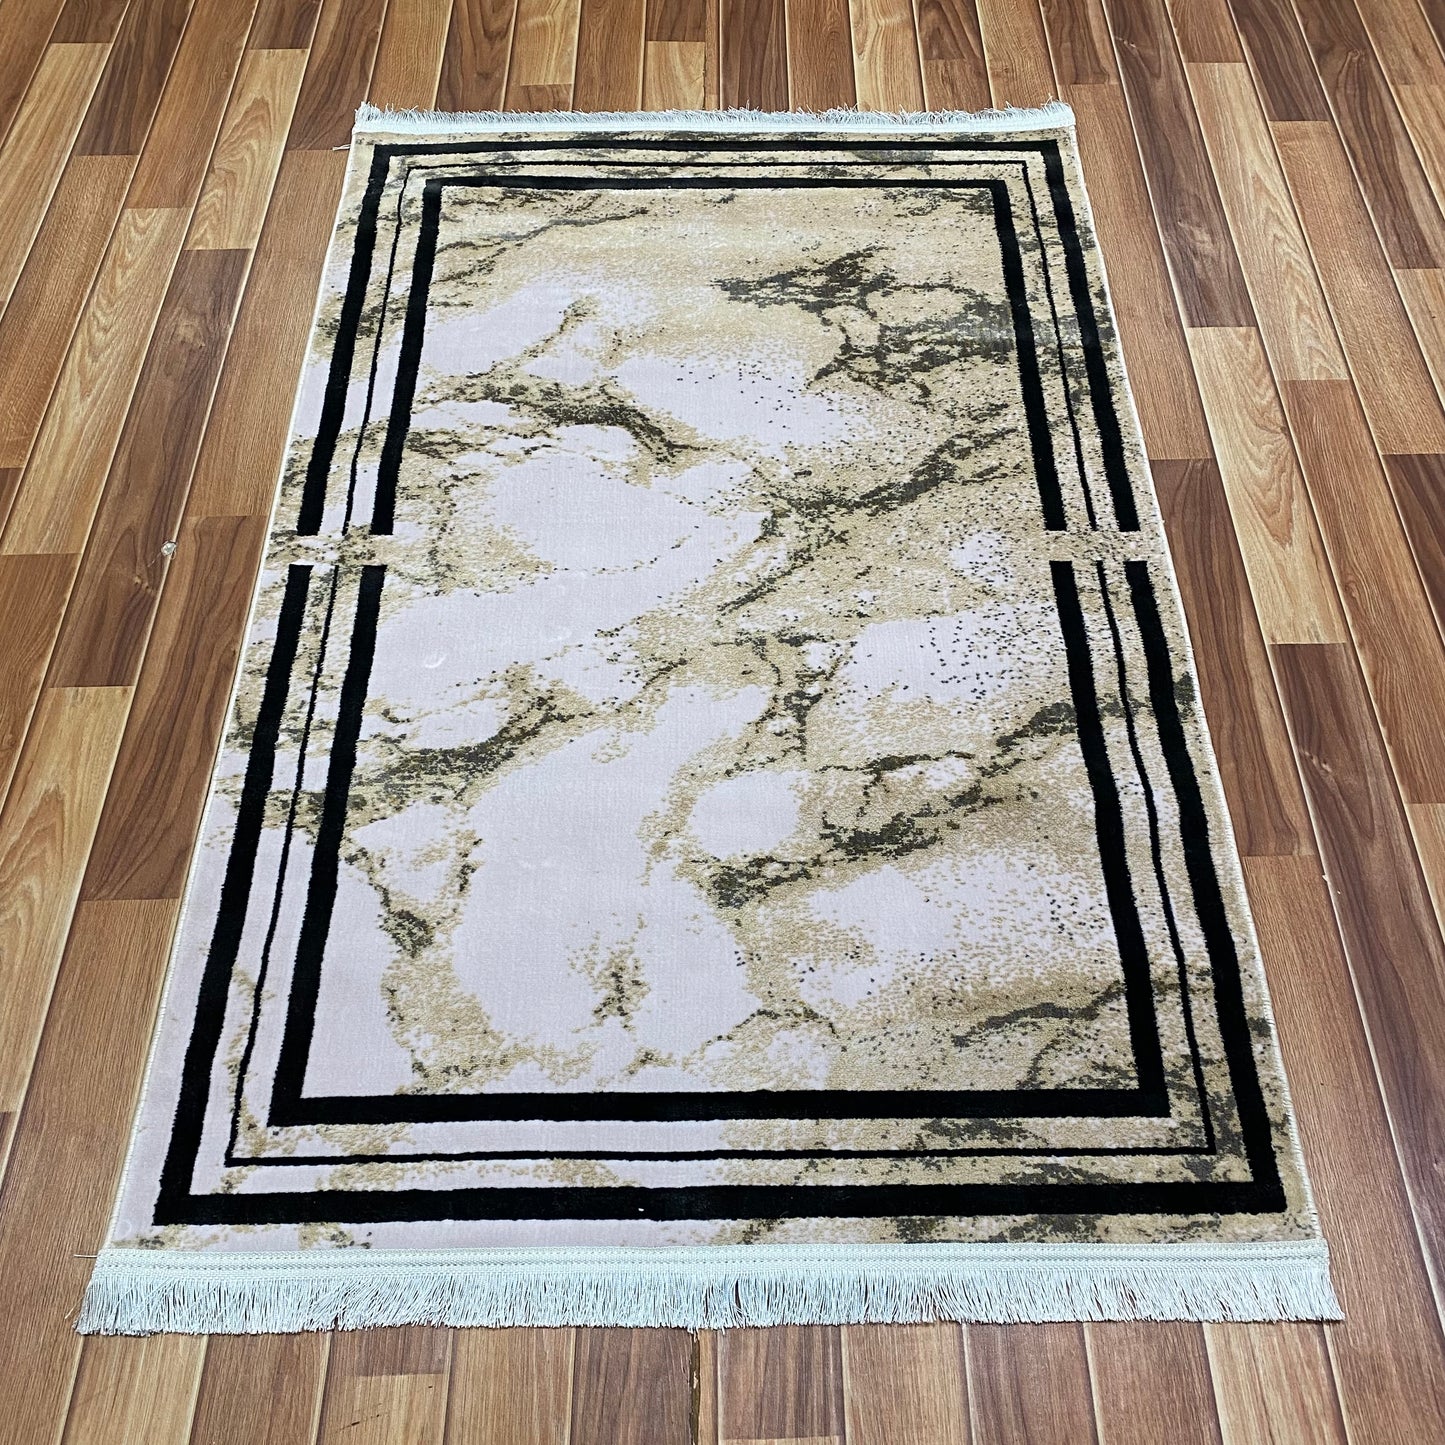 3 ft x 5 ft - Area Rug - Persian Silky 700 Reeds - Harmony 1 - Faded Beige and Black- Superior Comfort, Modern & Contemporary Style Accent Rugs